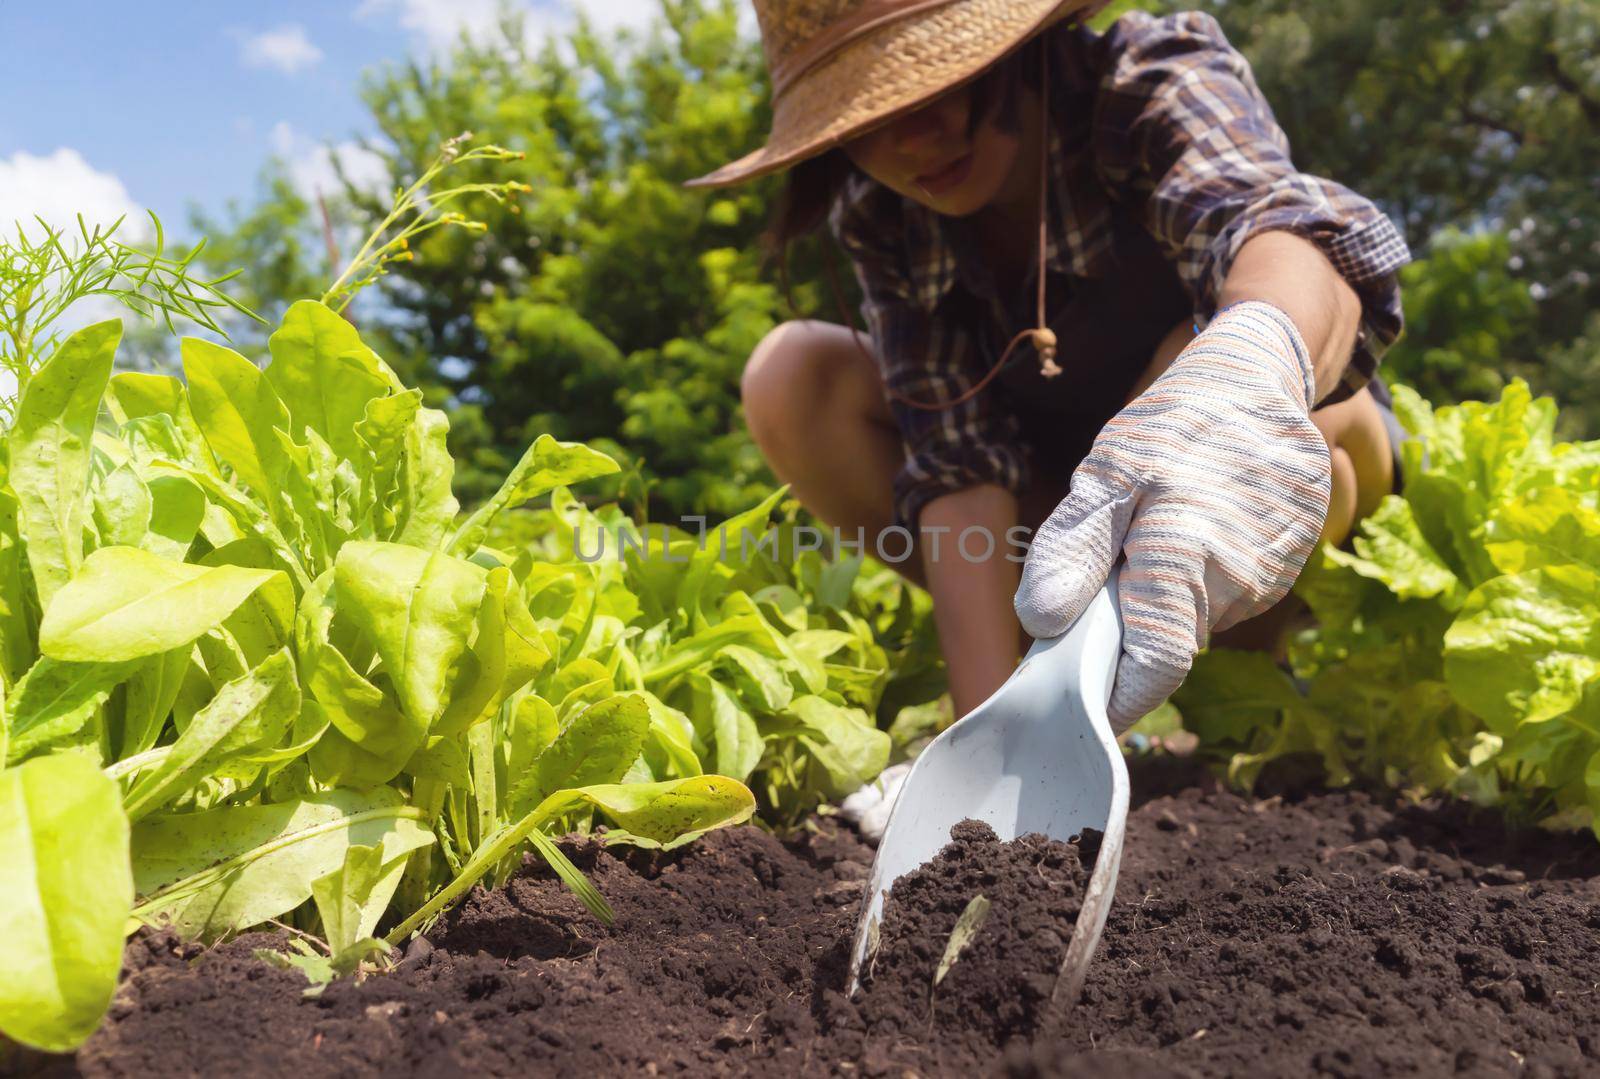 A young girl in gloves prepares the soil in the garden for planting seedlings, using such an inventory as garden trowel and rake, close up view.